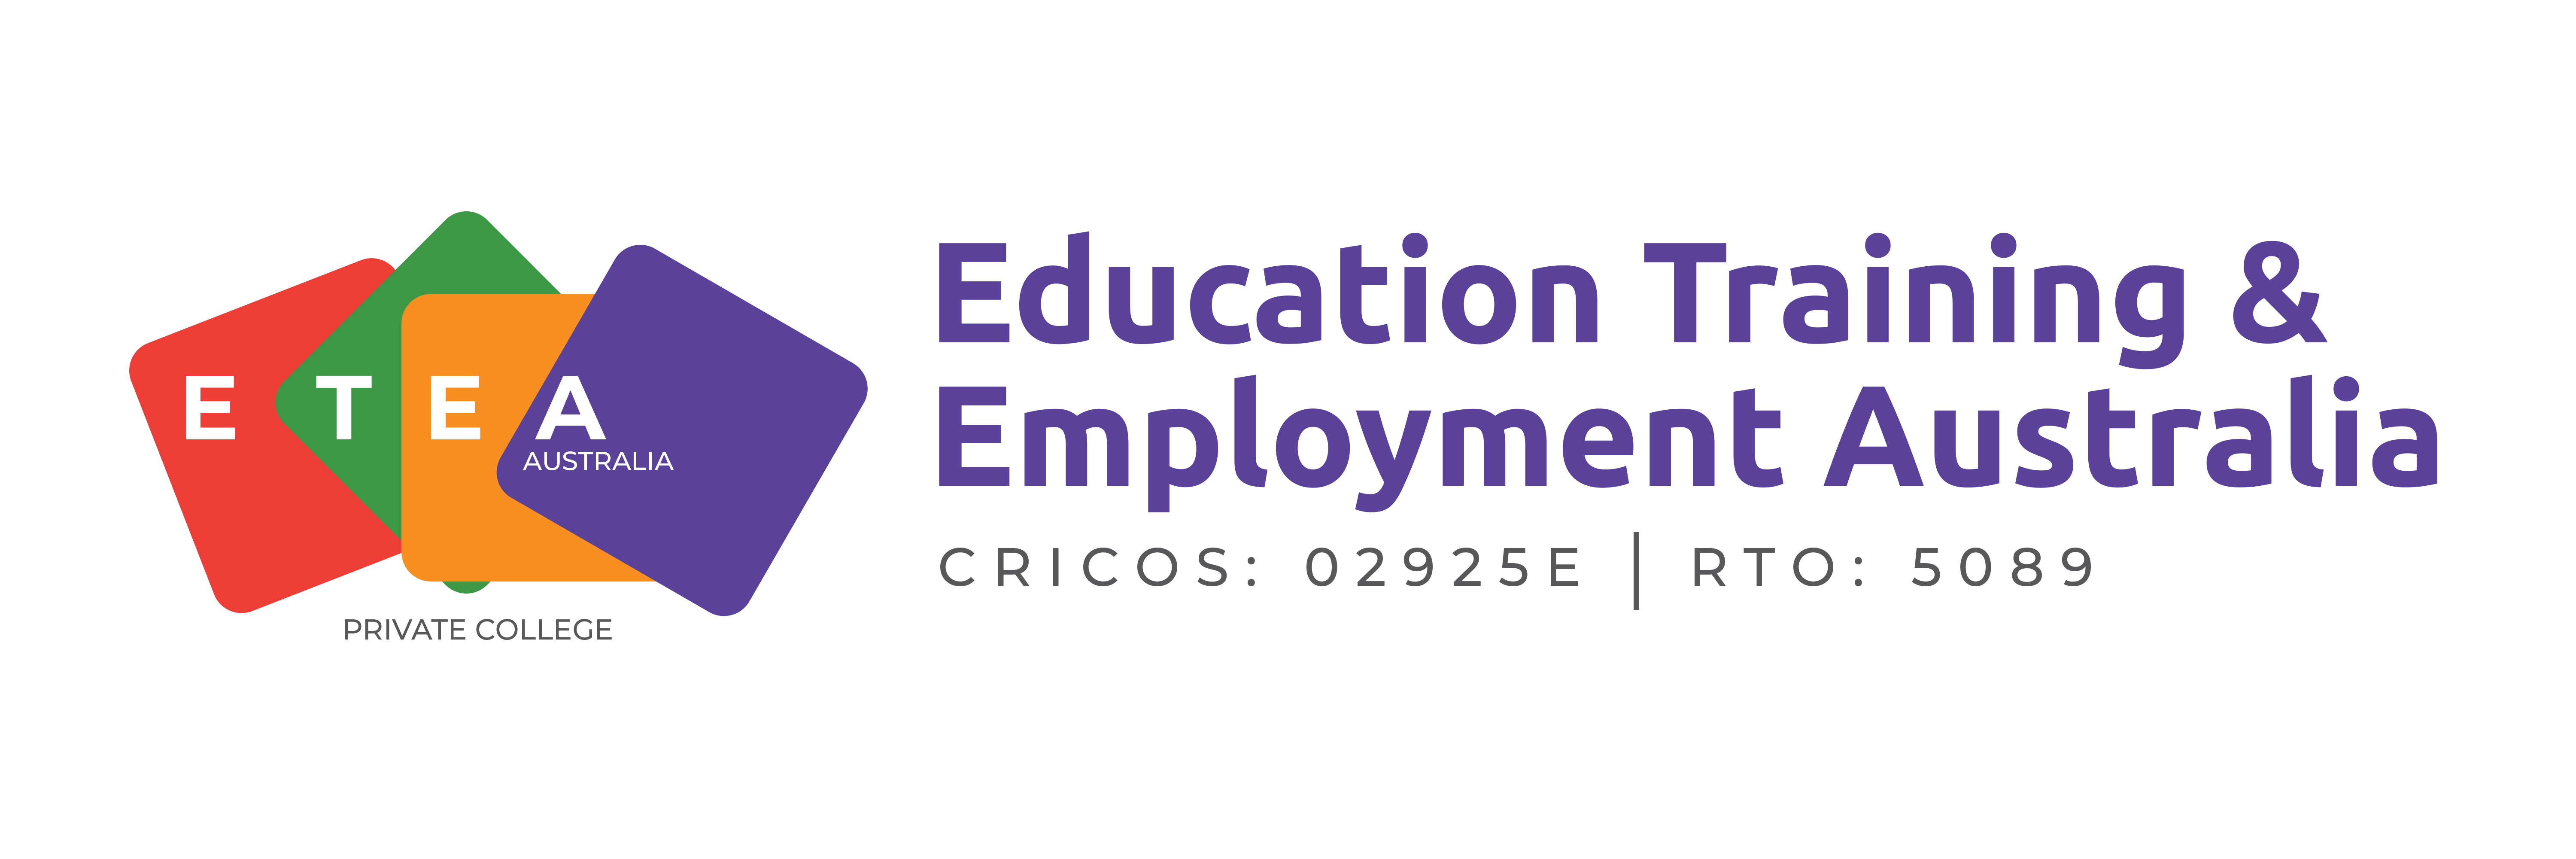 News NSW campus Archives - Education Training and Employment Australia